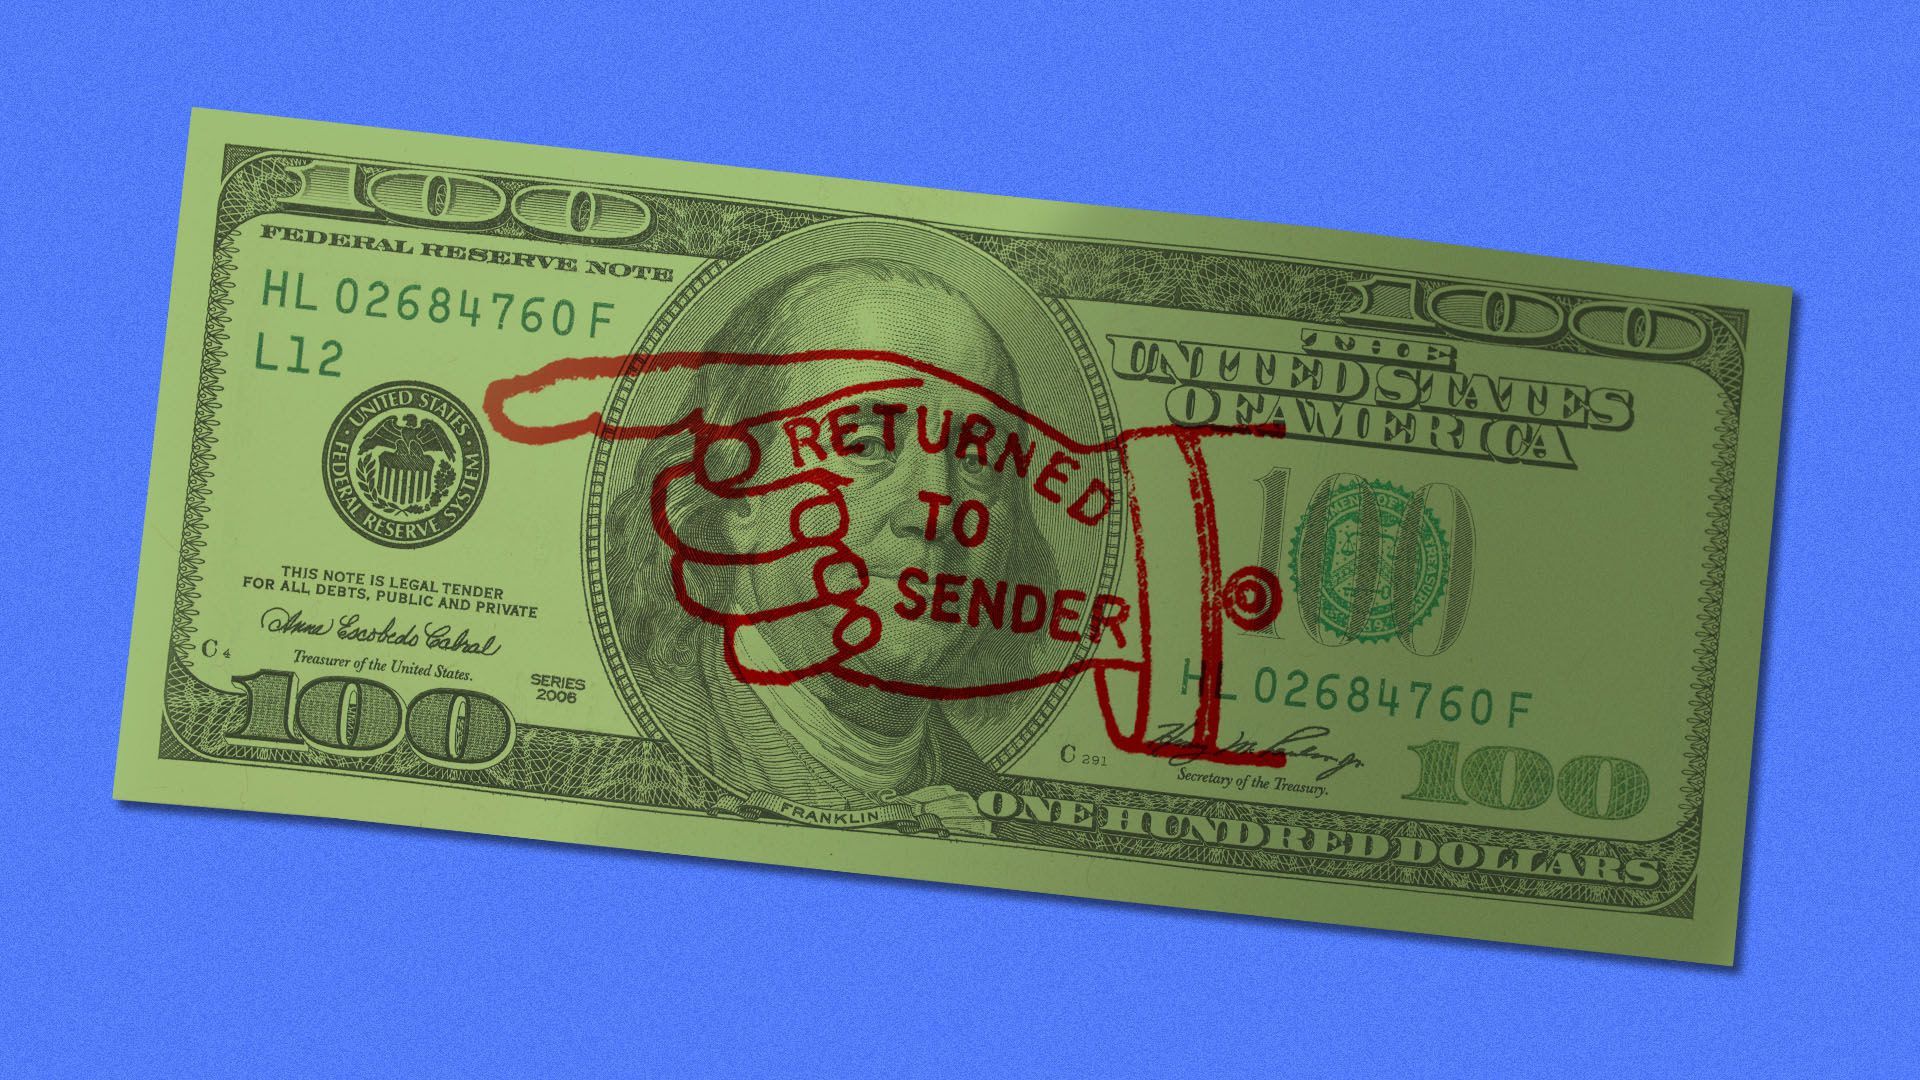 Illustration of a one hundred dollar bill with a returned to sender stamp on it